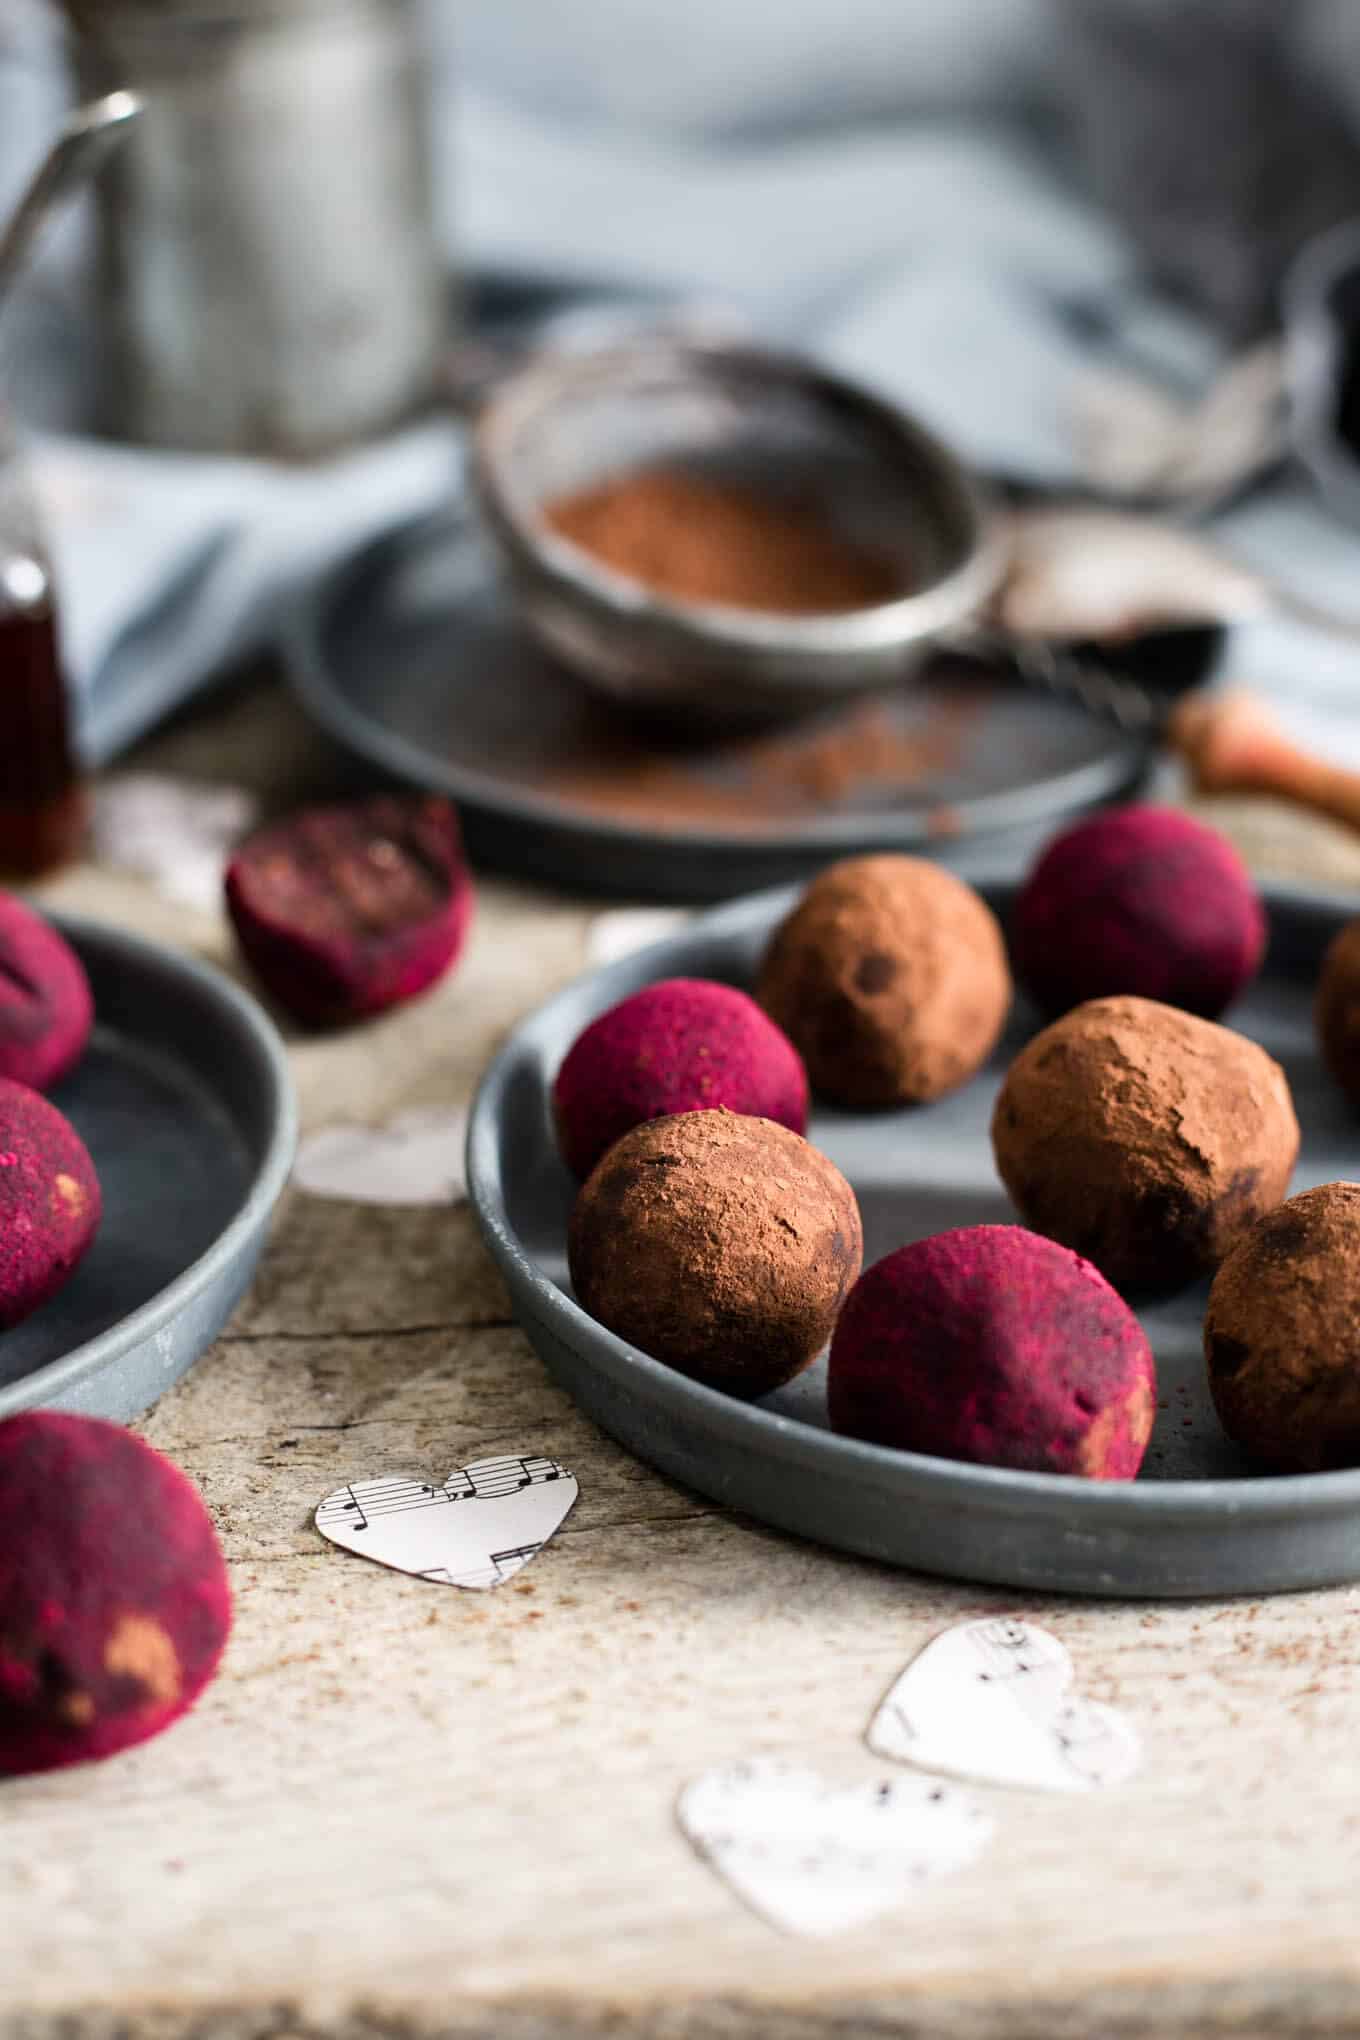 Easy and absolutely delicious recipe for chocolate and peanut butter truffles #refinedsugarfree #dairyfree #vegan | via @annabanana.co